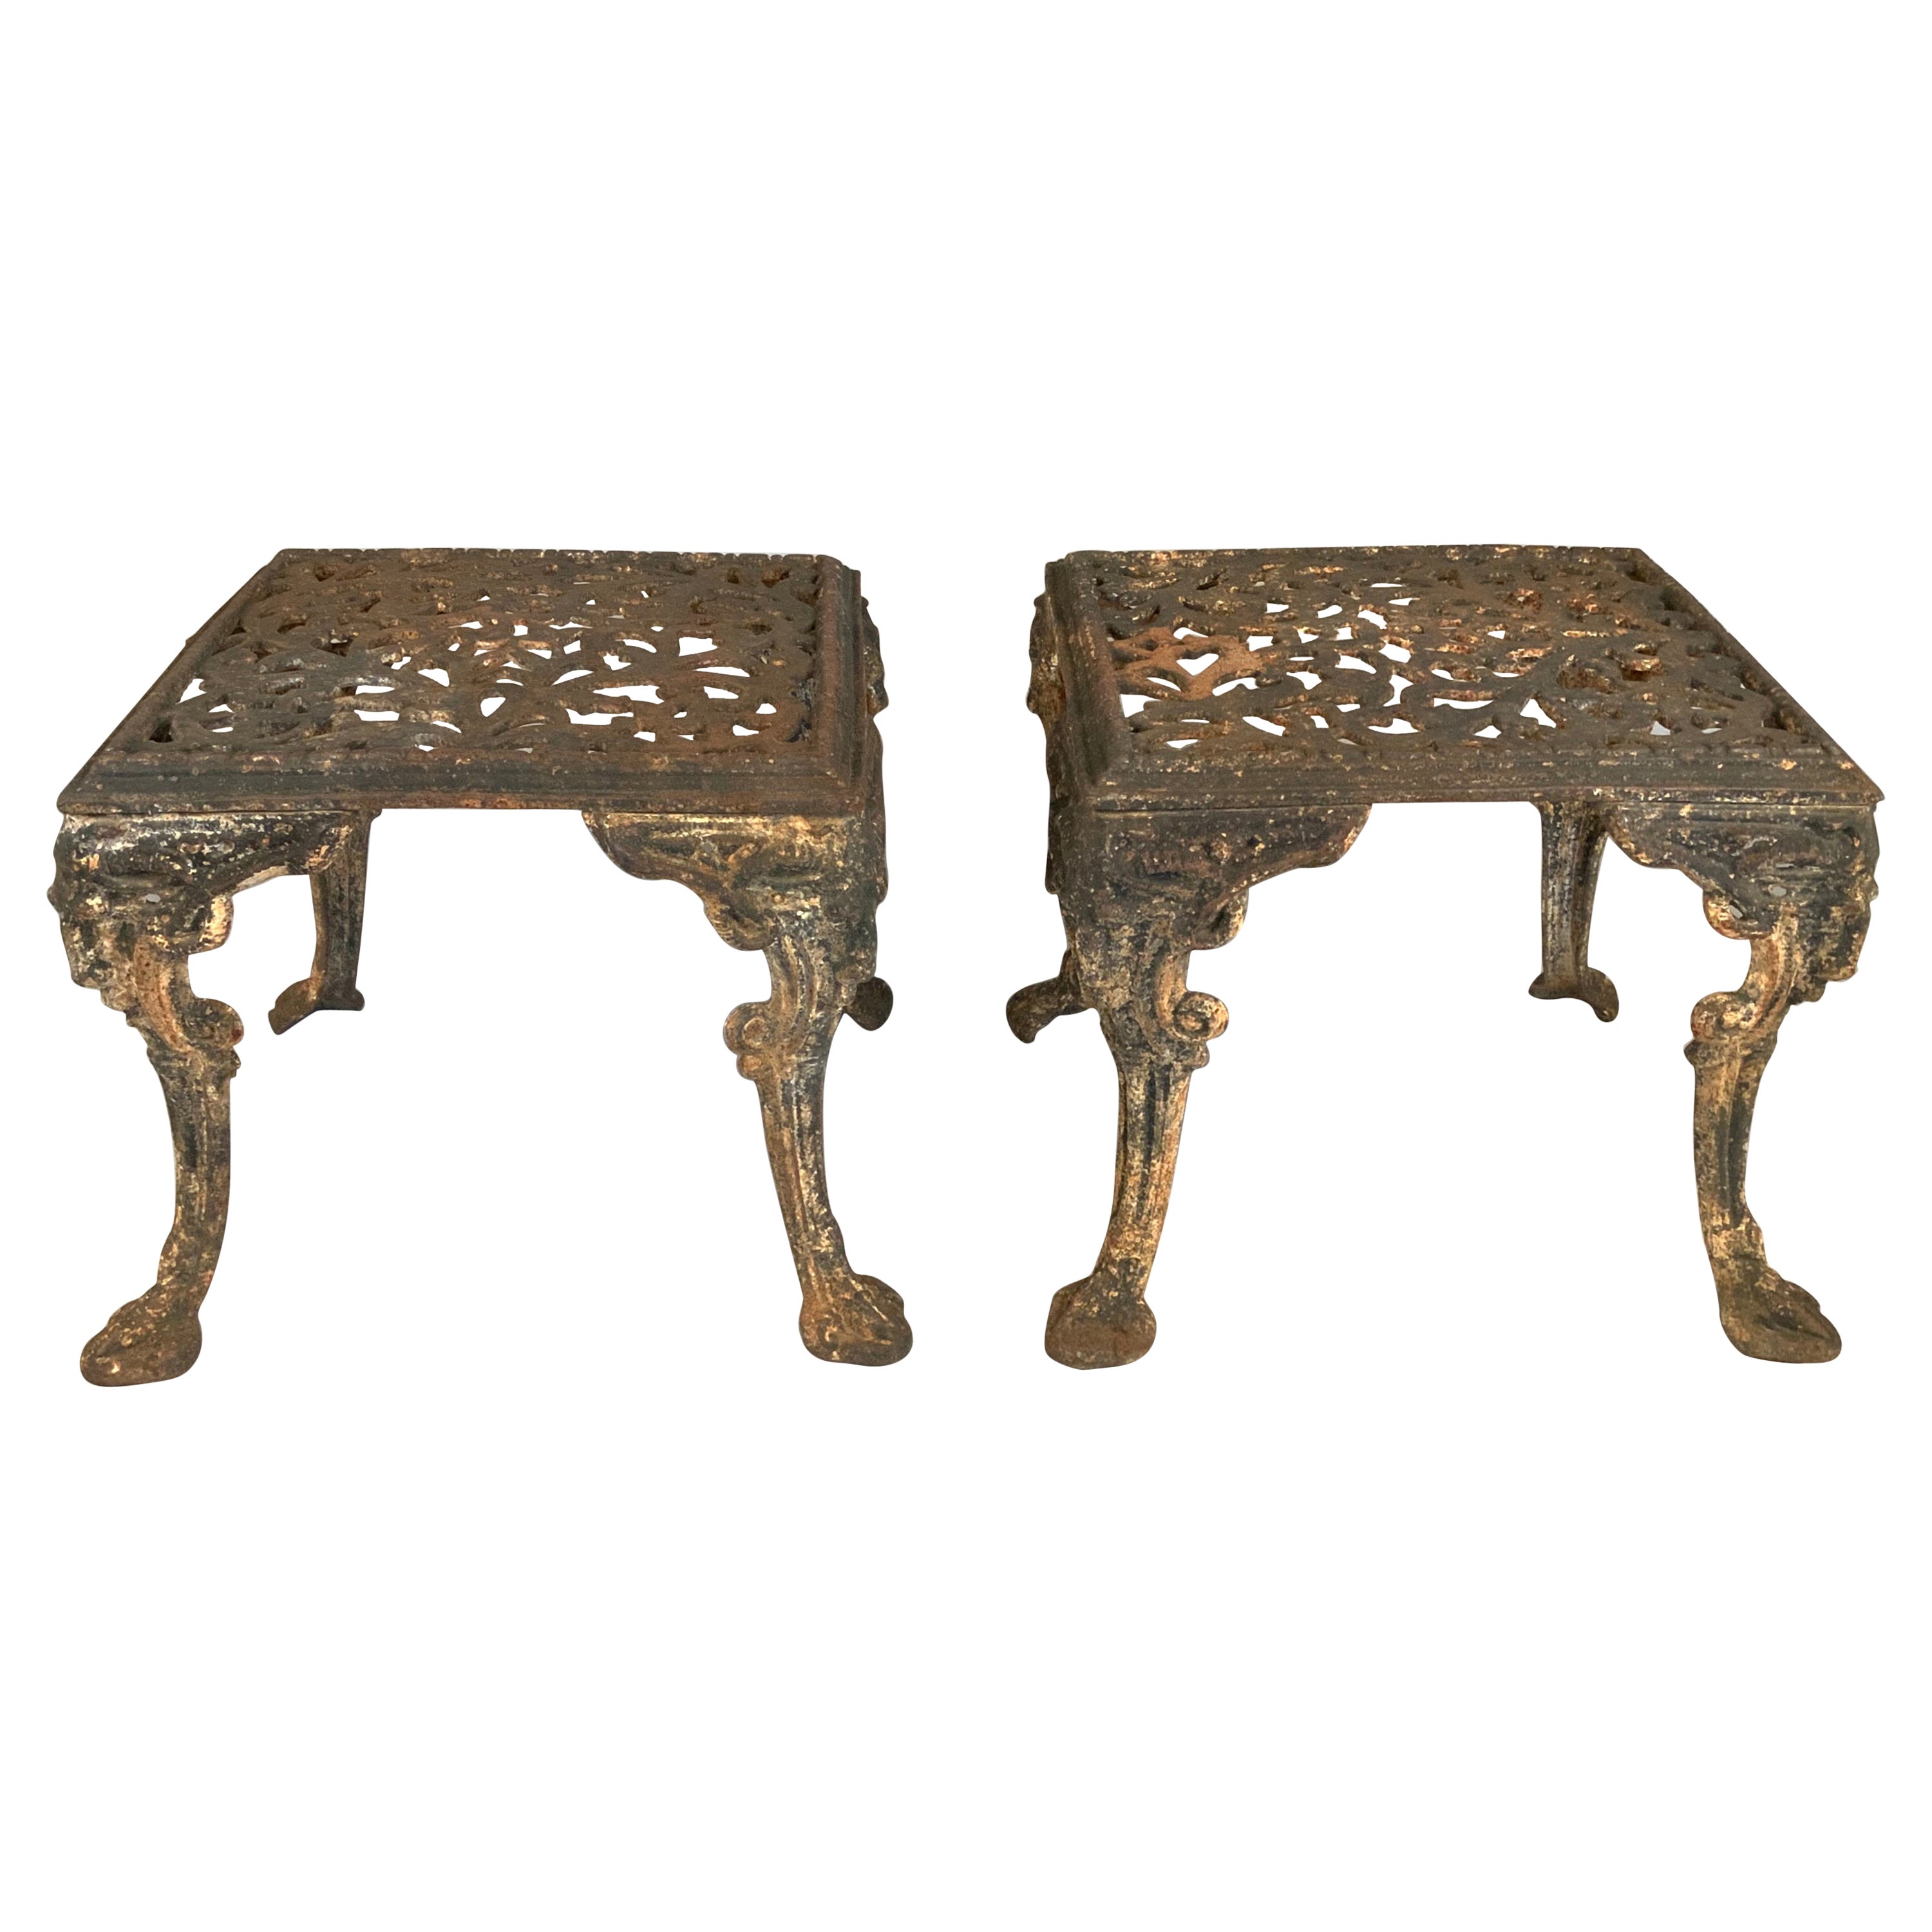 Pair of 19th Century Cast Iron Satyr Garden Benches or Tables